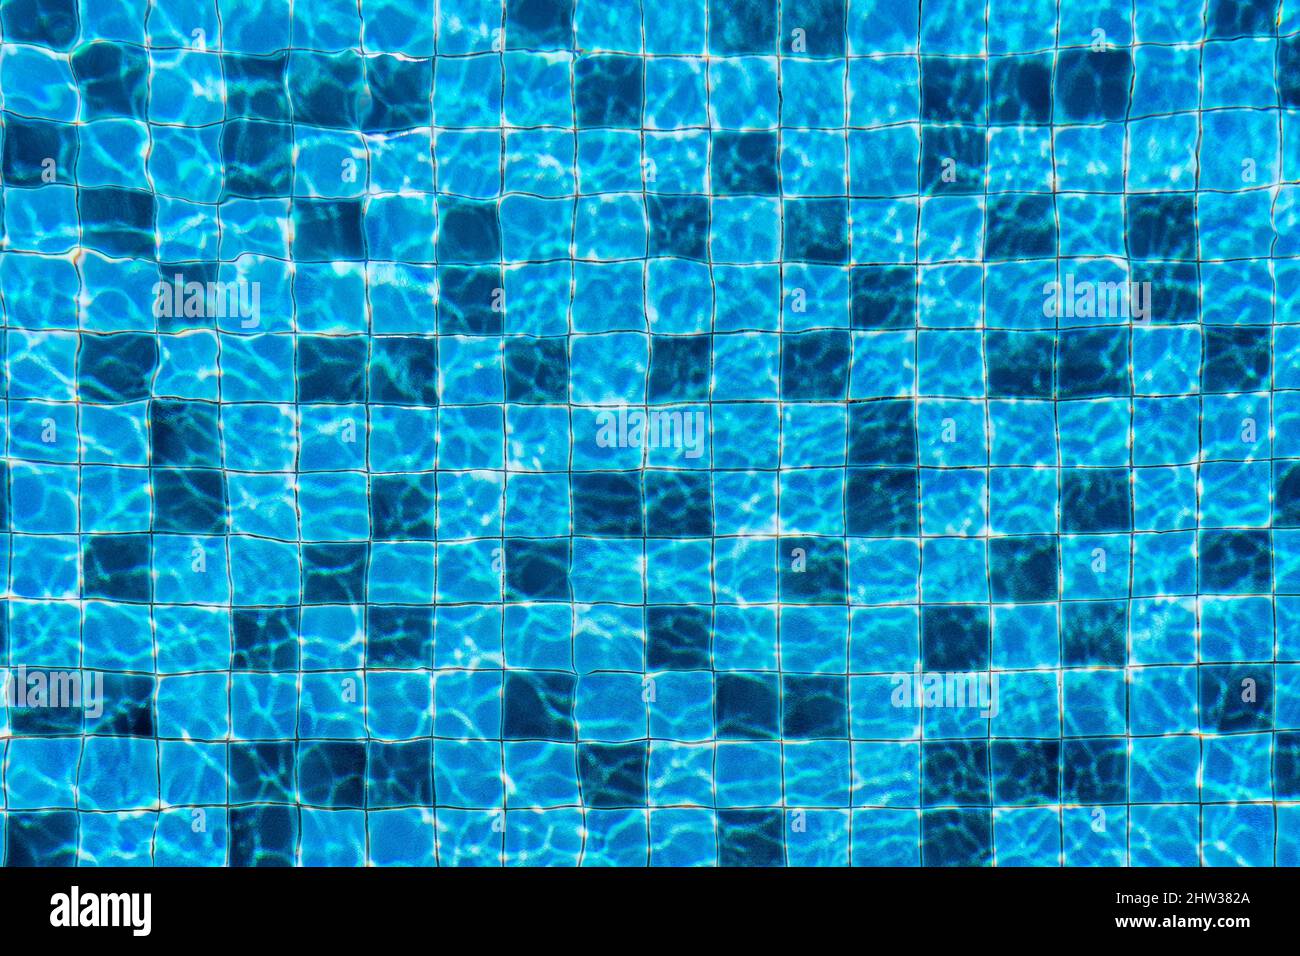 Swimming pool top down view into rippled blue water and tiled floor design, summer beach party background. Stock Photo